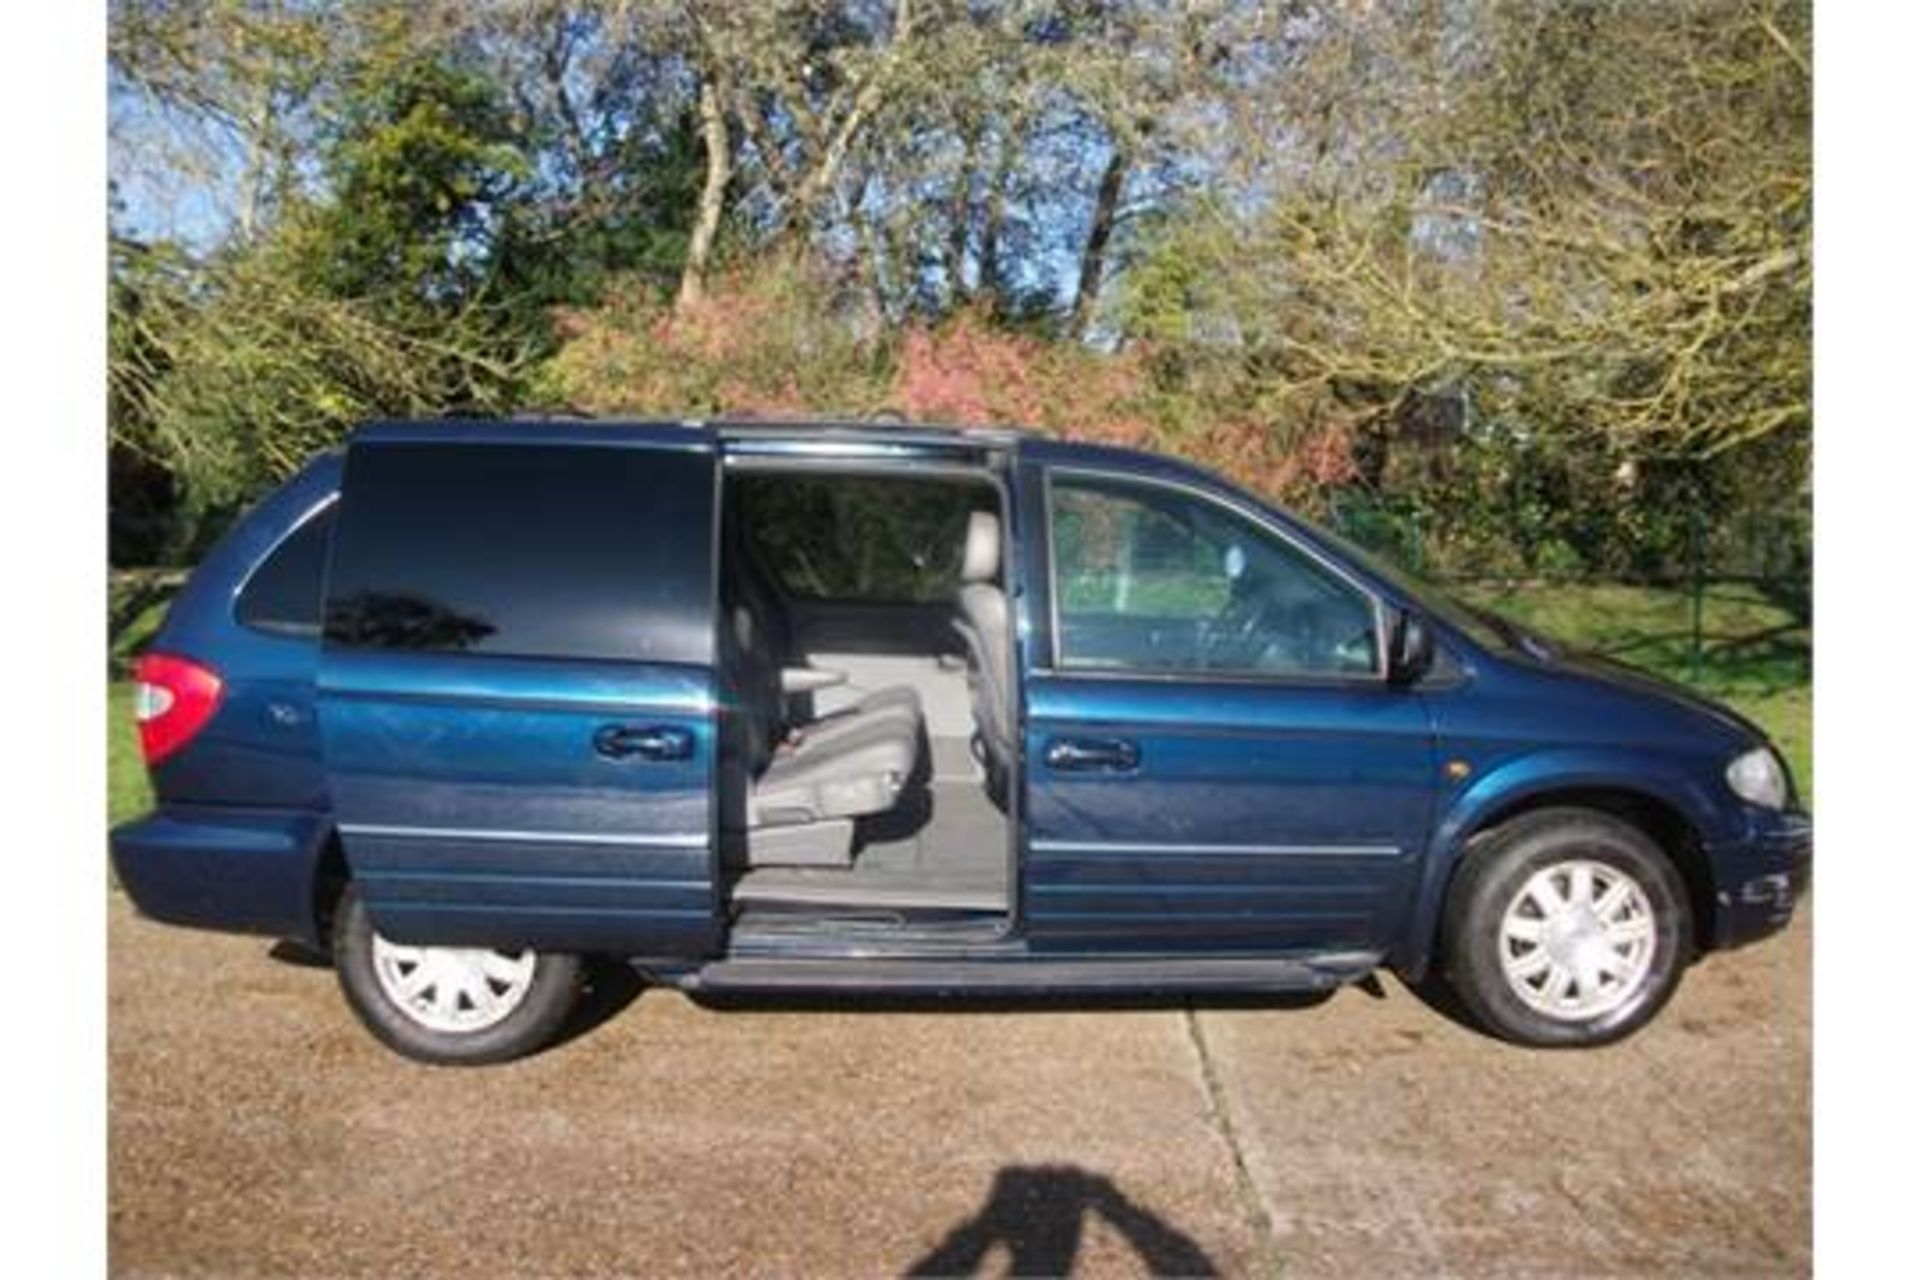 CHRYSLER GRAND VOYAGER 2.8 CRD DIESEL LIMITED 7 SEATS, STOW&GO SEATS - Image 2 of 16